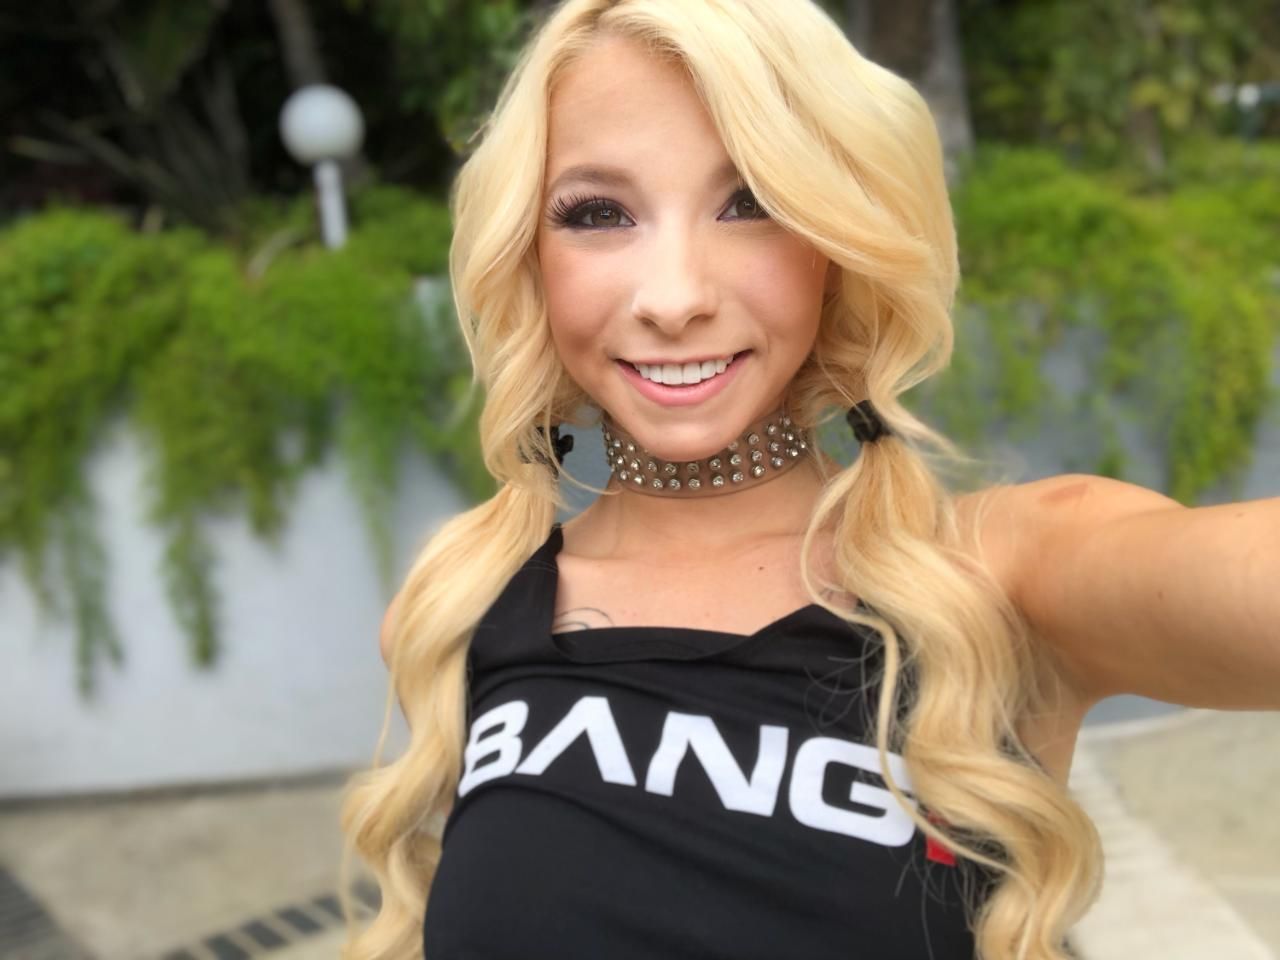 20 Questions with Kenzie Reeves